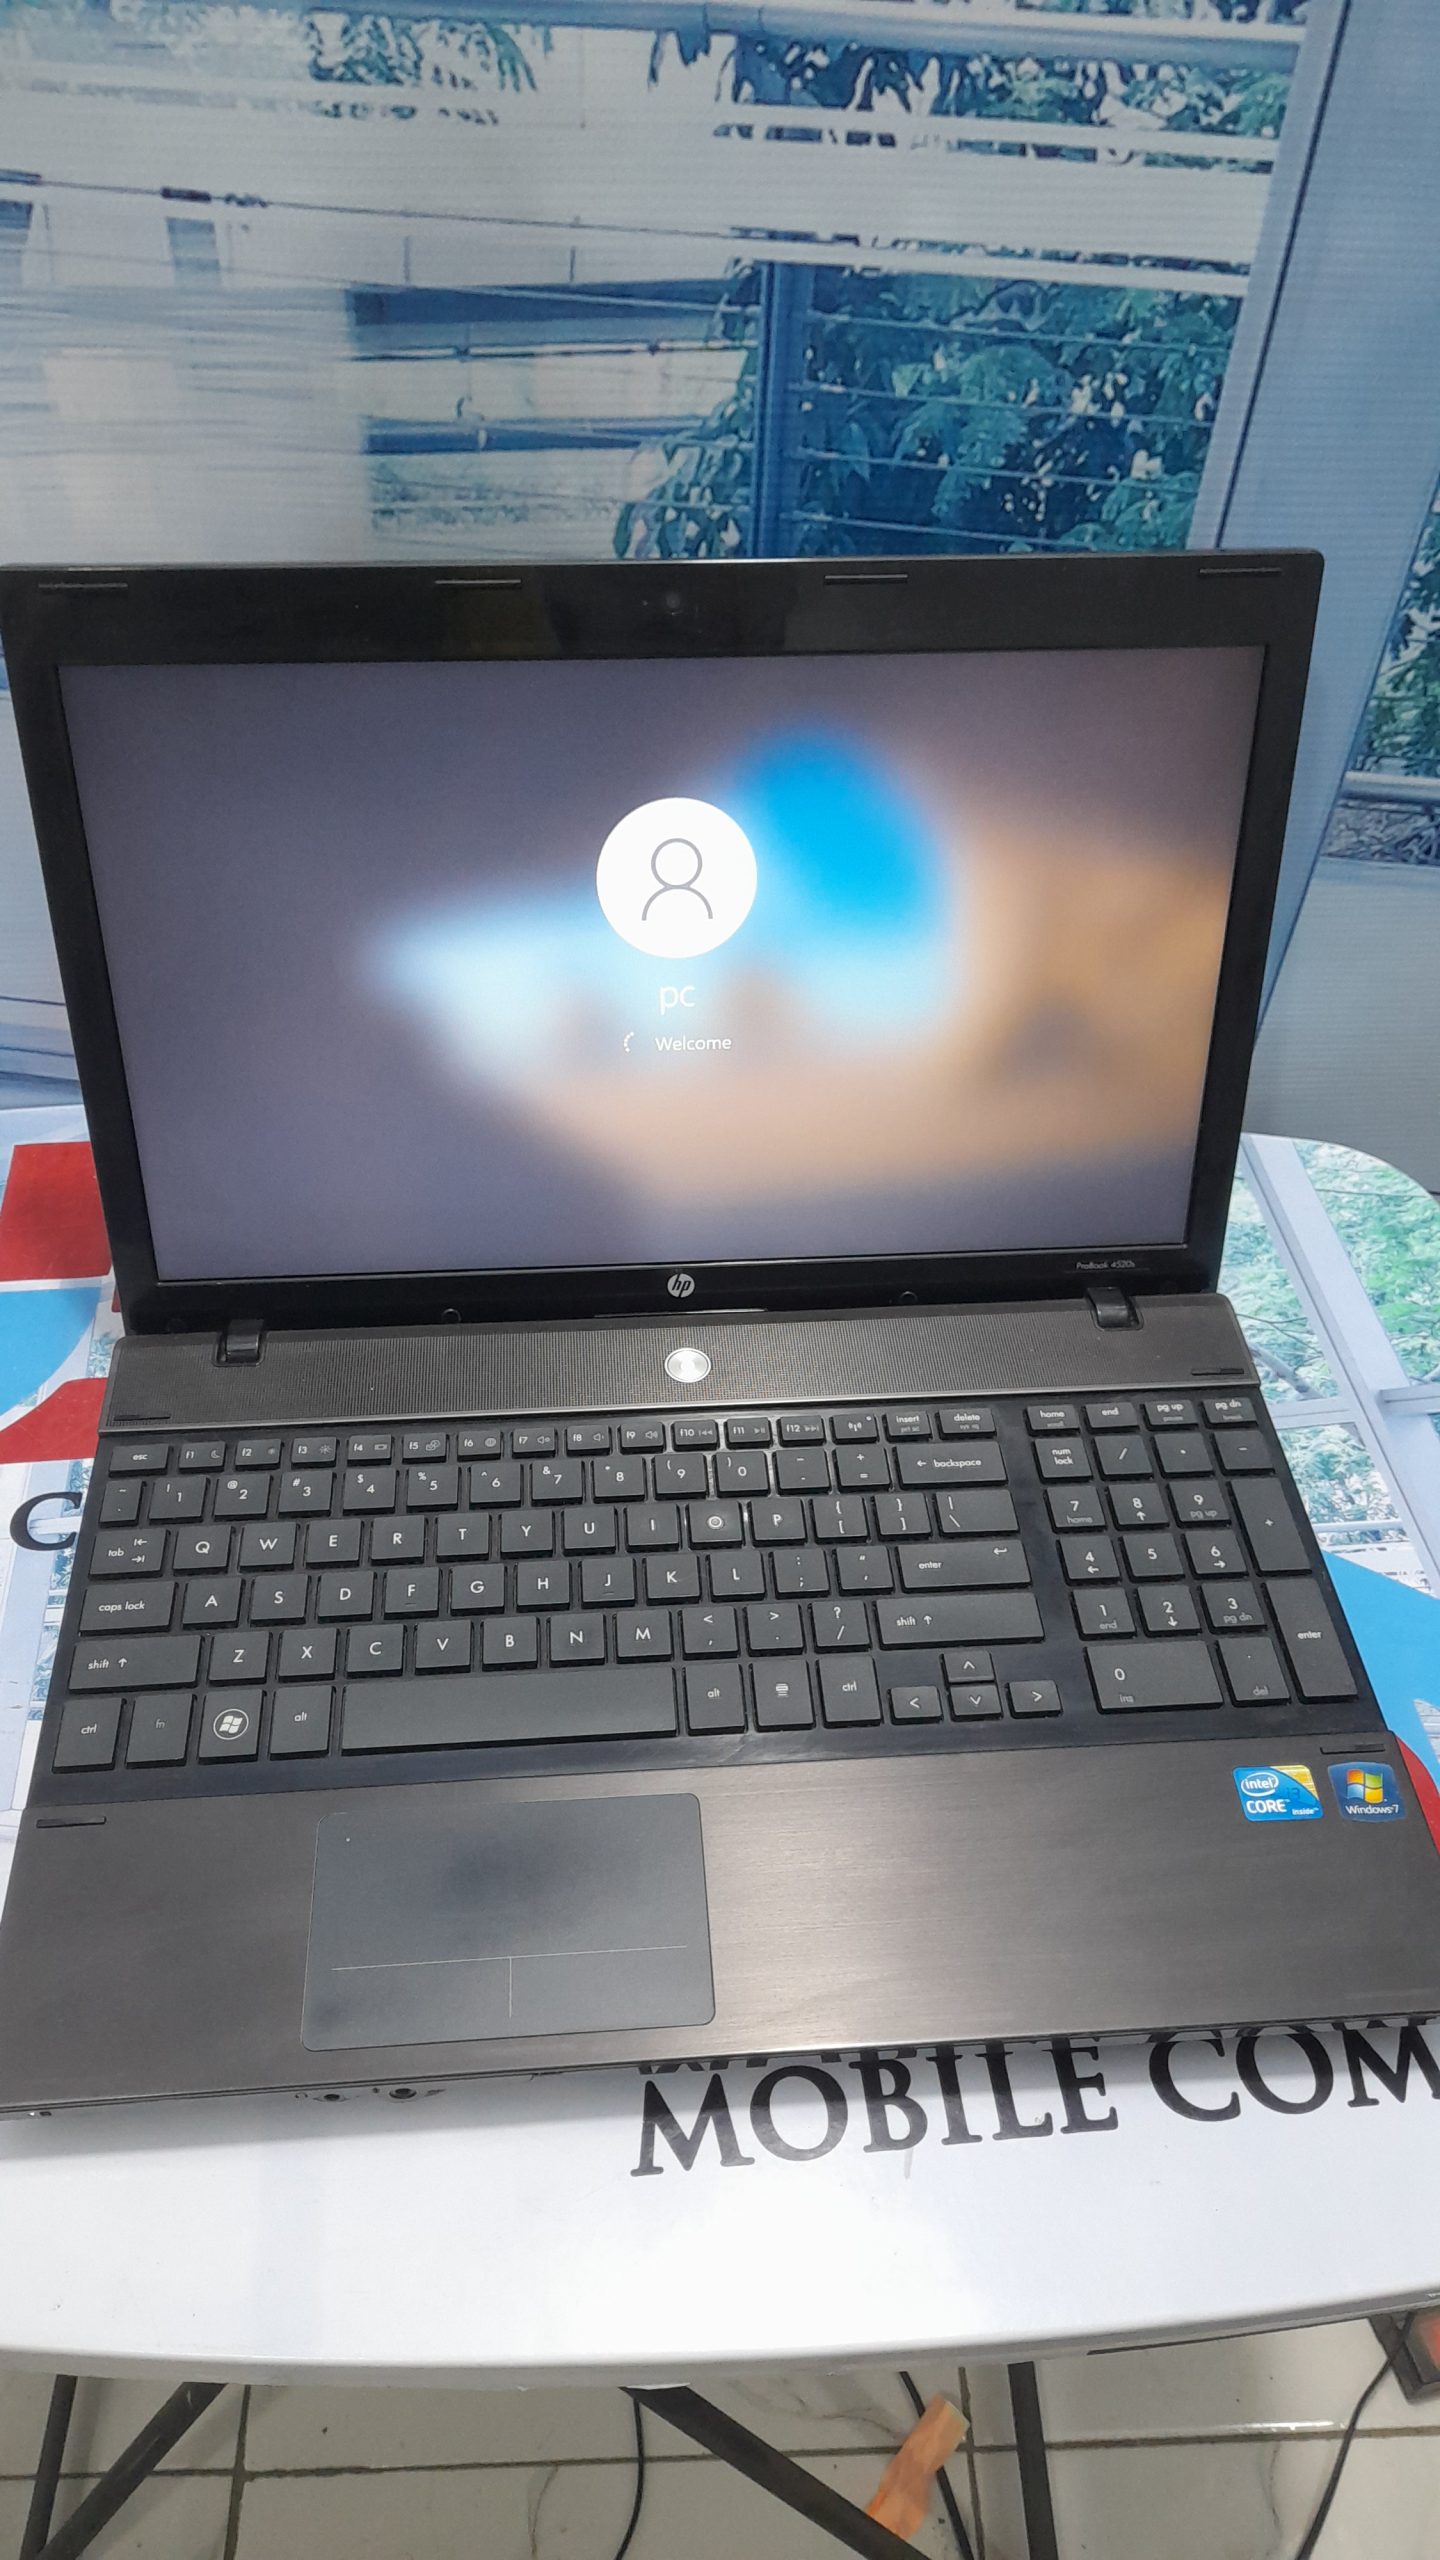 Hp 4520s intel core i3 320G Hdd 4G ram, uk used dell laptop for sale in lagos at wholesale prise, laptop warehouse in ikeja, laptop shops in computer village, uk used laptop in computer village ikeja, buy sell swap laptop in ikeja, free delivery laptop